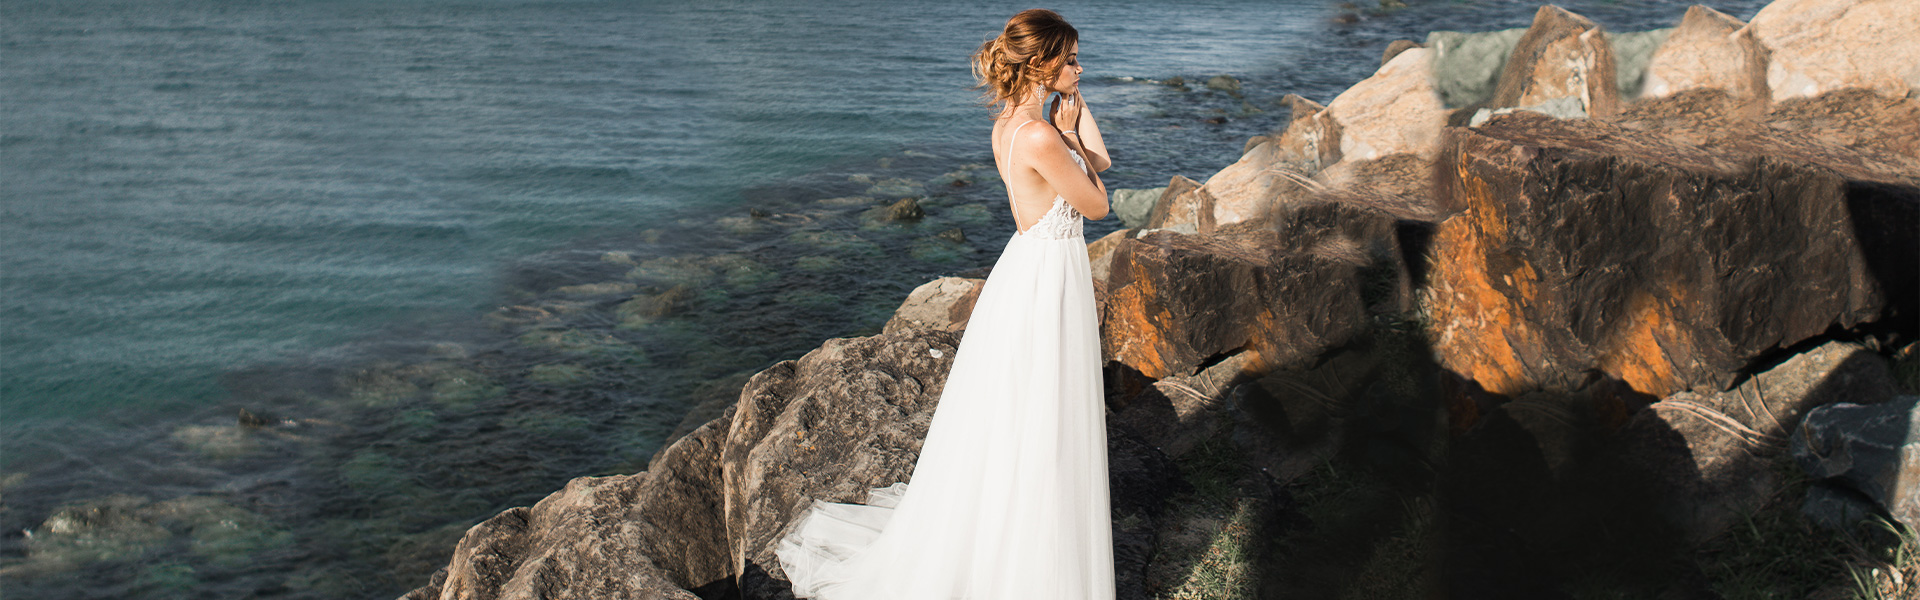 Bride wearing simple a line dress by the ocean